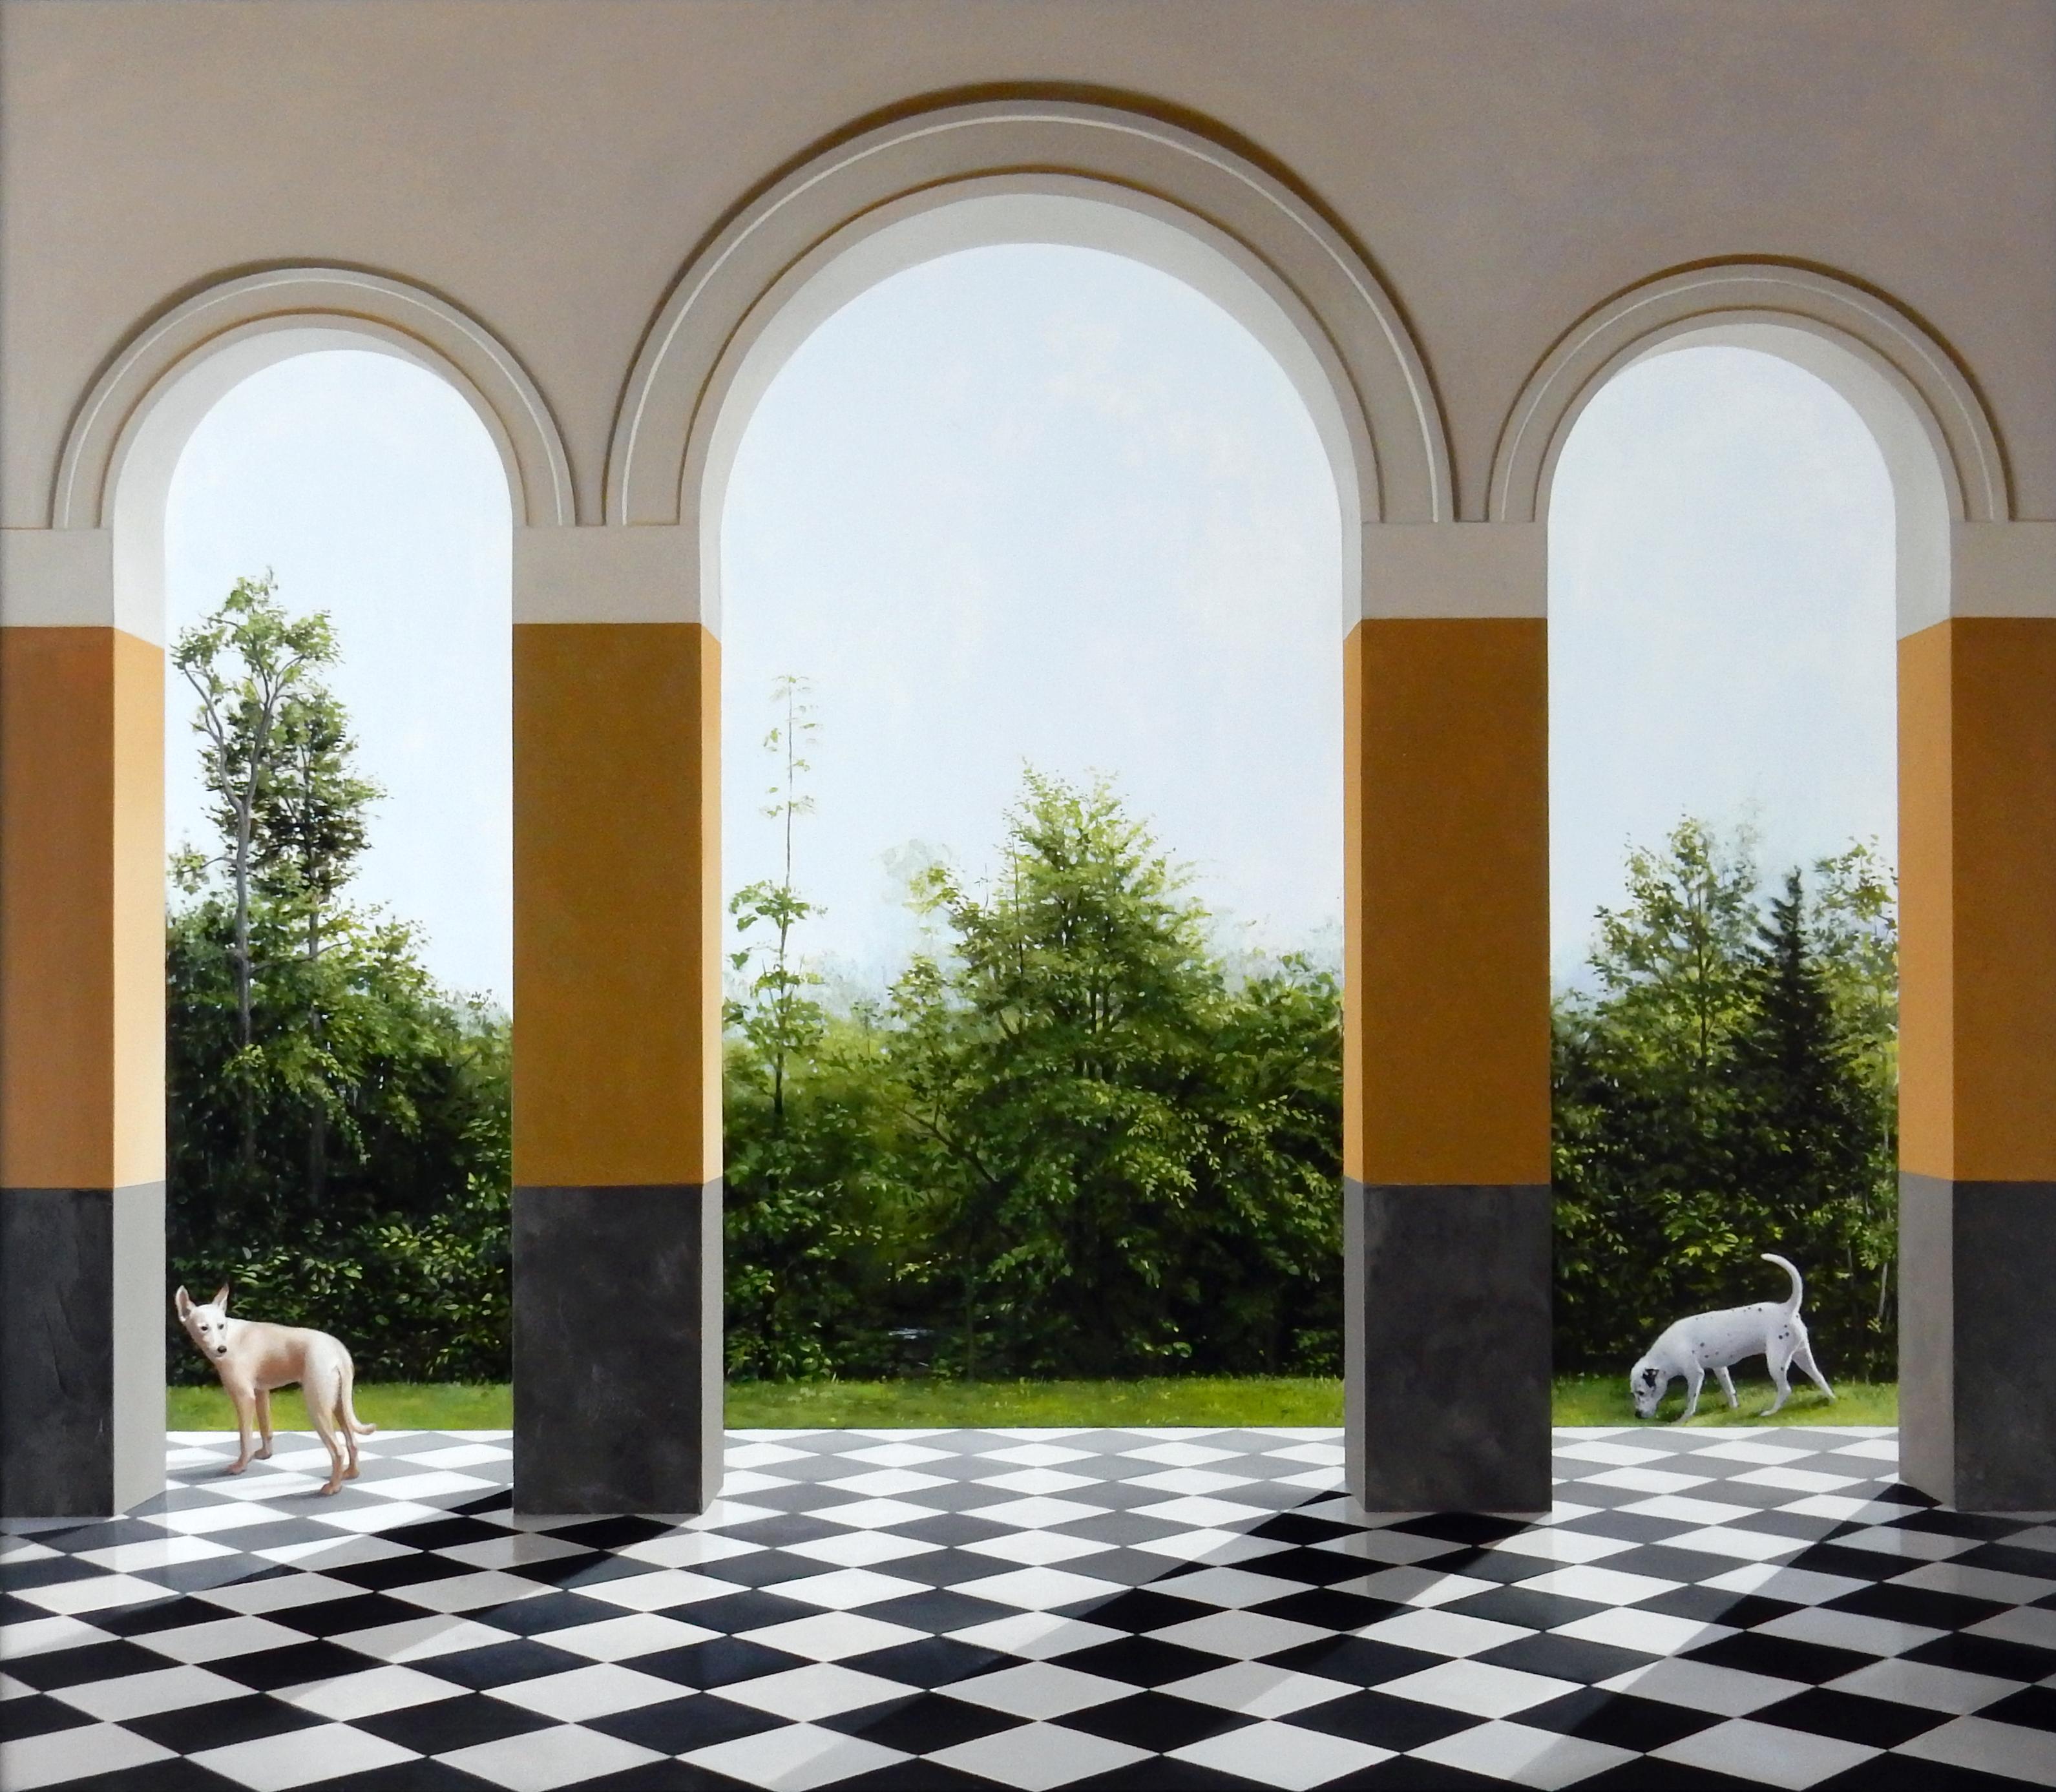 Carol Pylant Landscape Painting - Before the End - Architectural Arches with Wooded Landscape & Dogs, Oil Painting